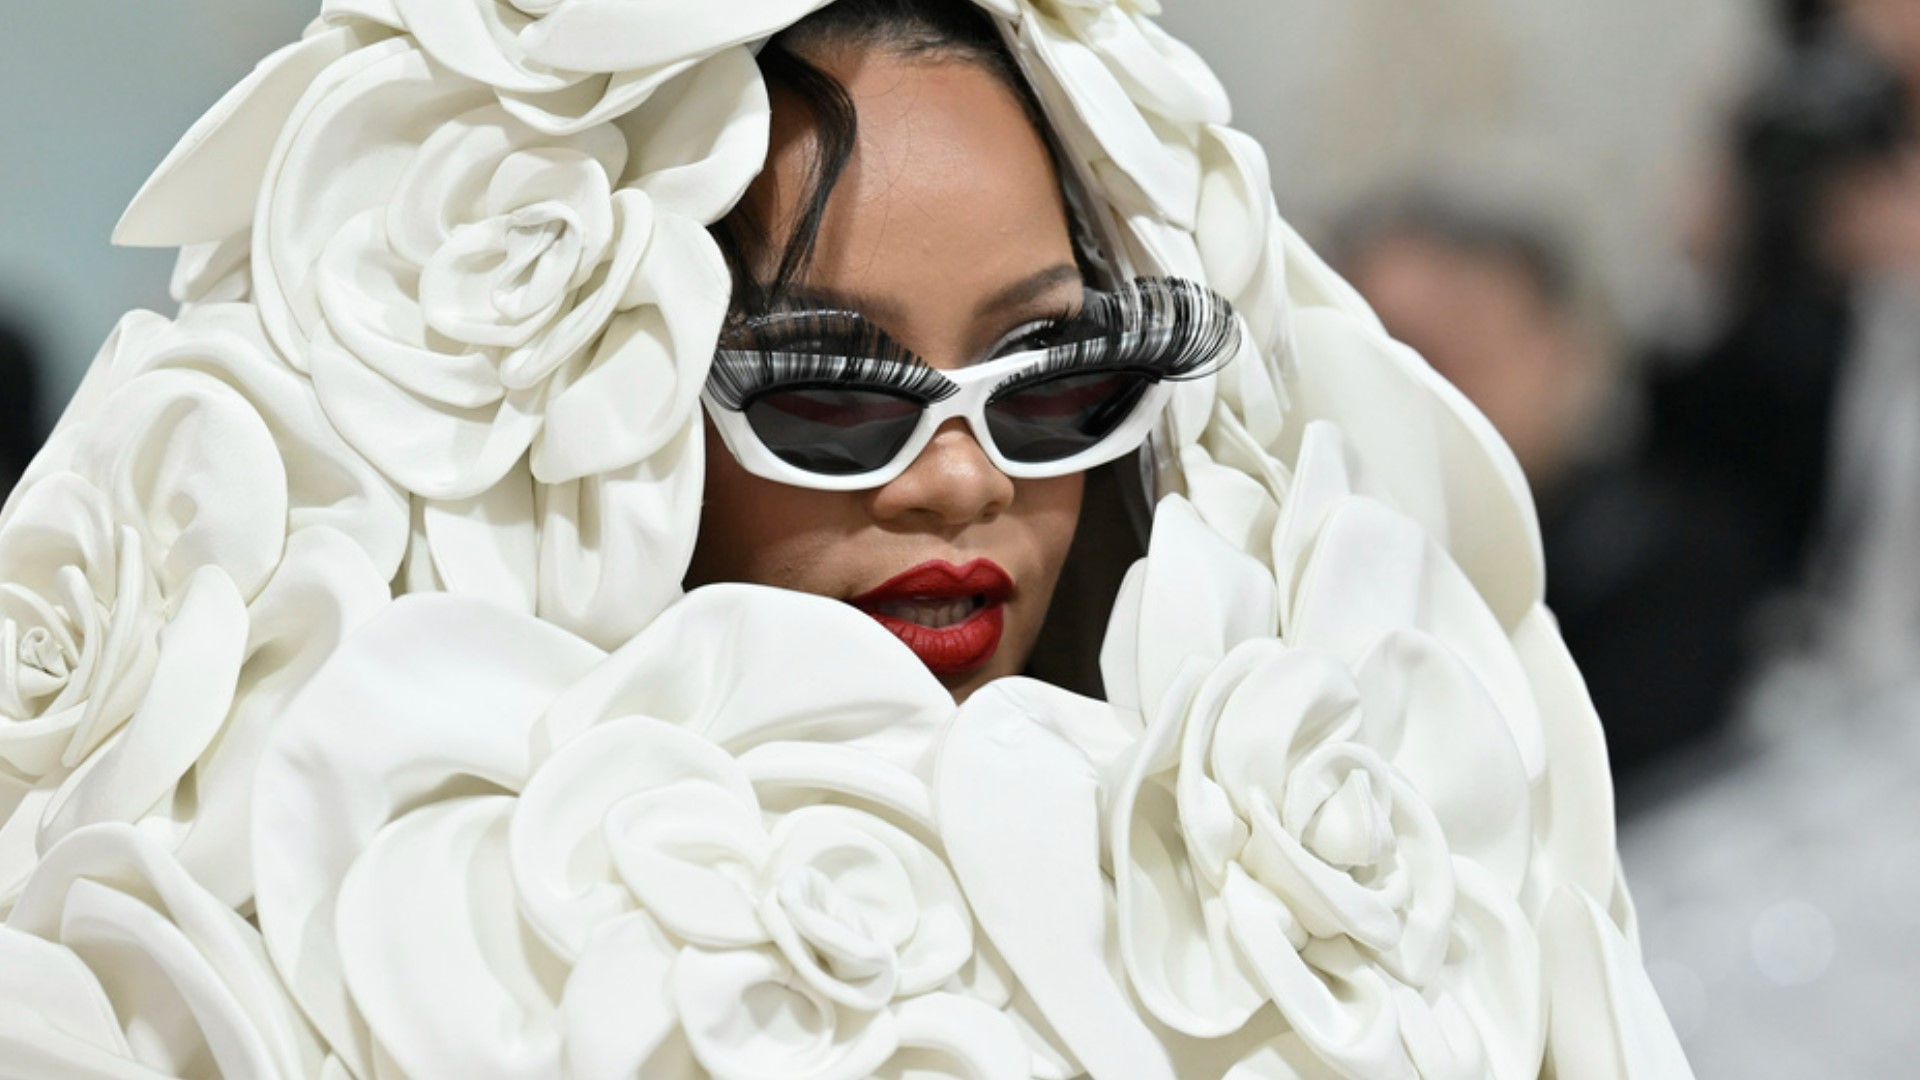 Fashion’s biggest night certainly delivered some big surprises at the 2023 Met Gala.